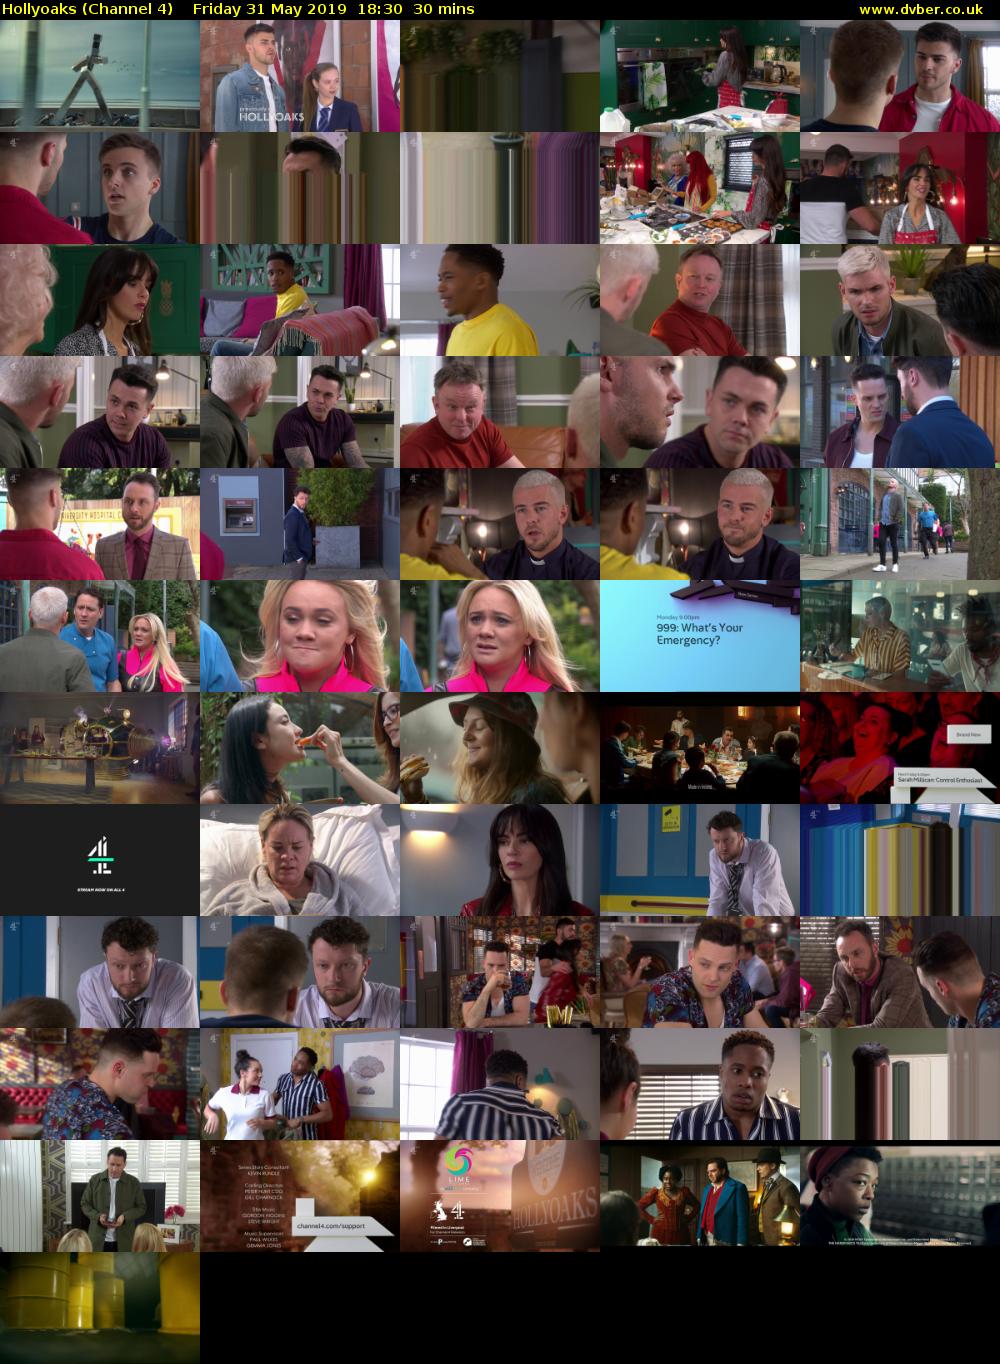 Hollyoaks (Channel 4) Friday 31 May 2019 18:30 - 19:00